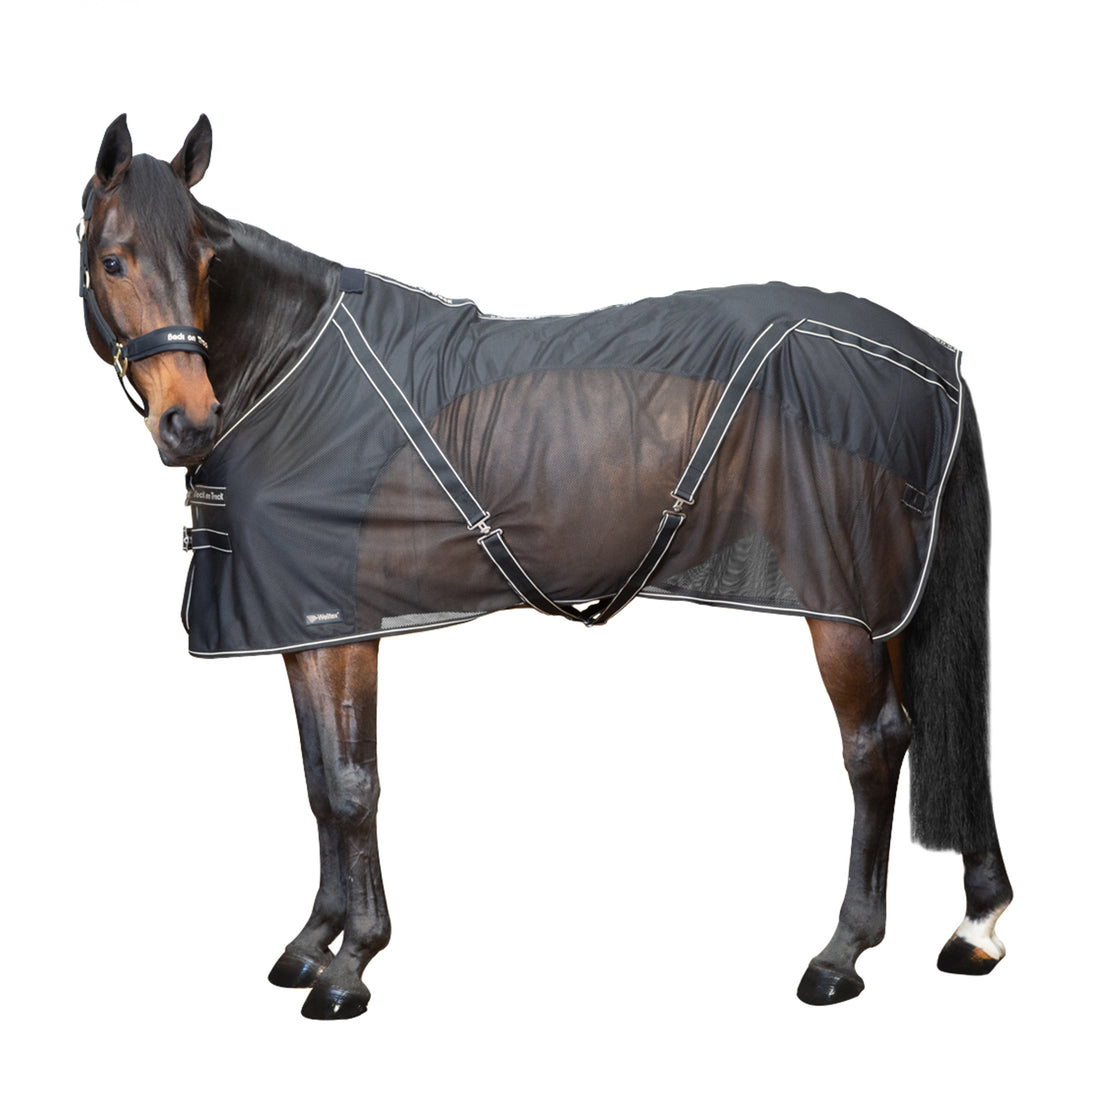 Horse Blanket Leg Straps -Adjustable - Stretch - Sold as a pair